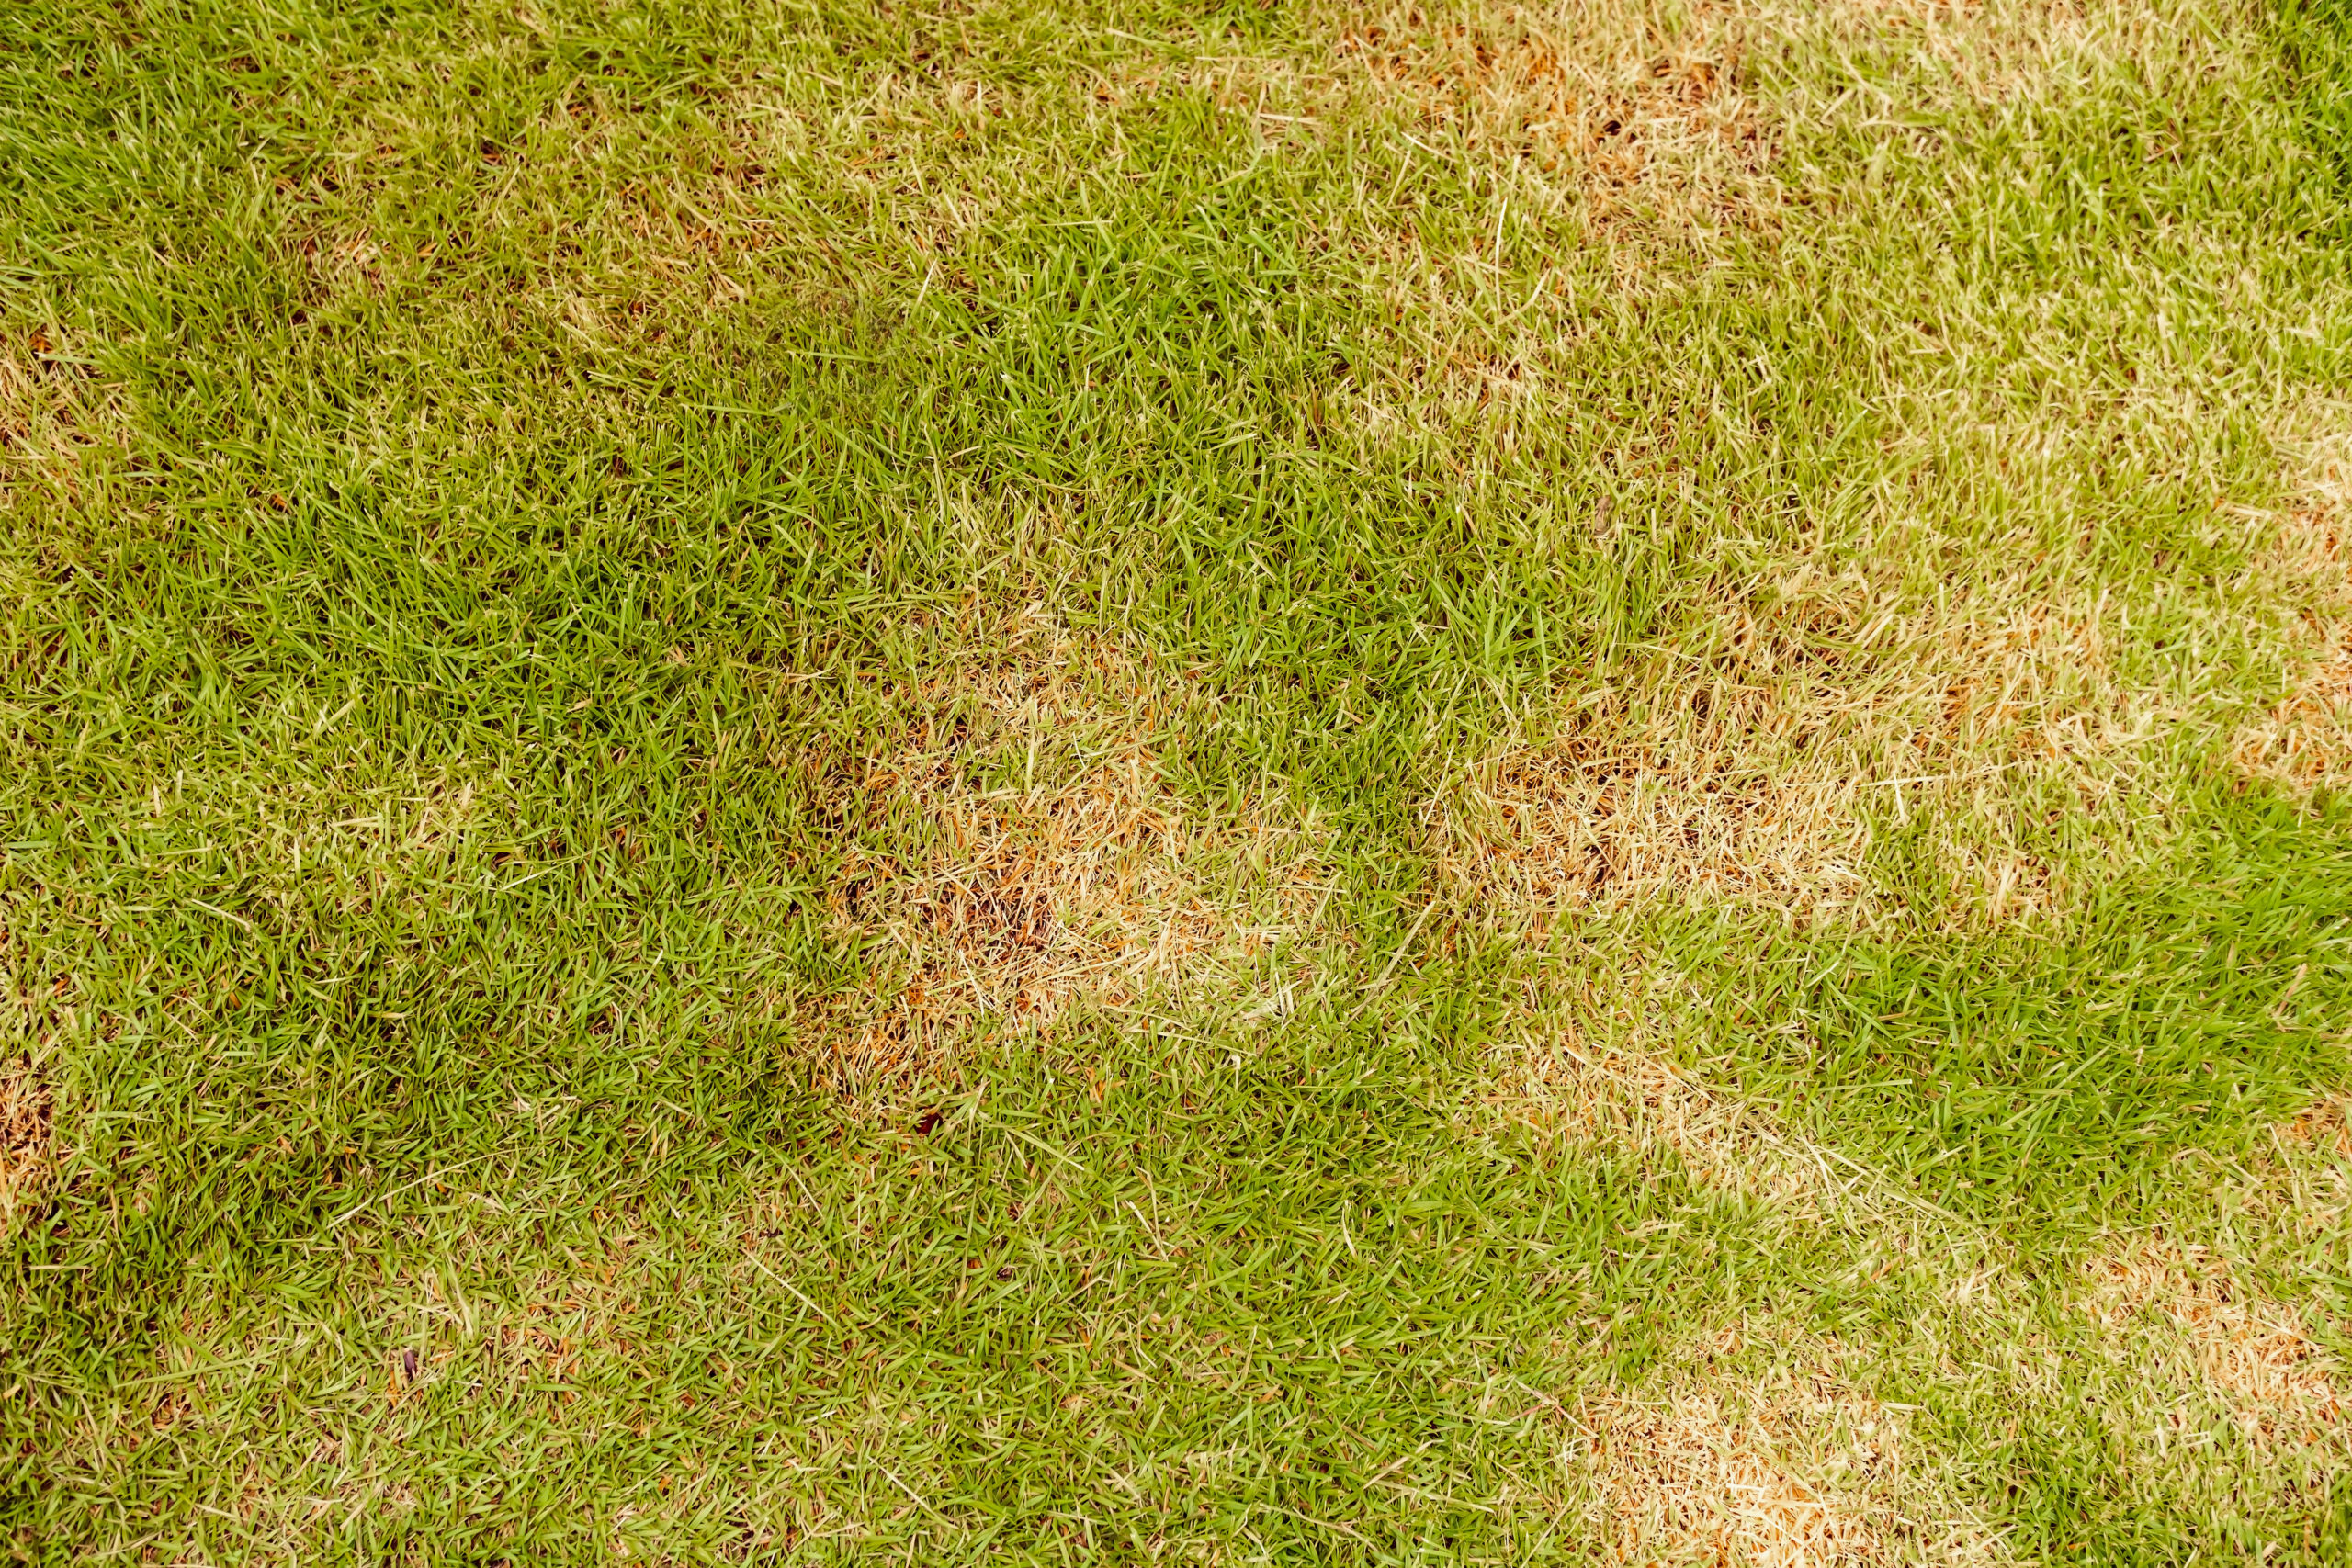 Signs Your Lawn Has a Disease